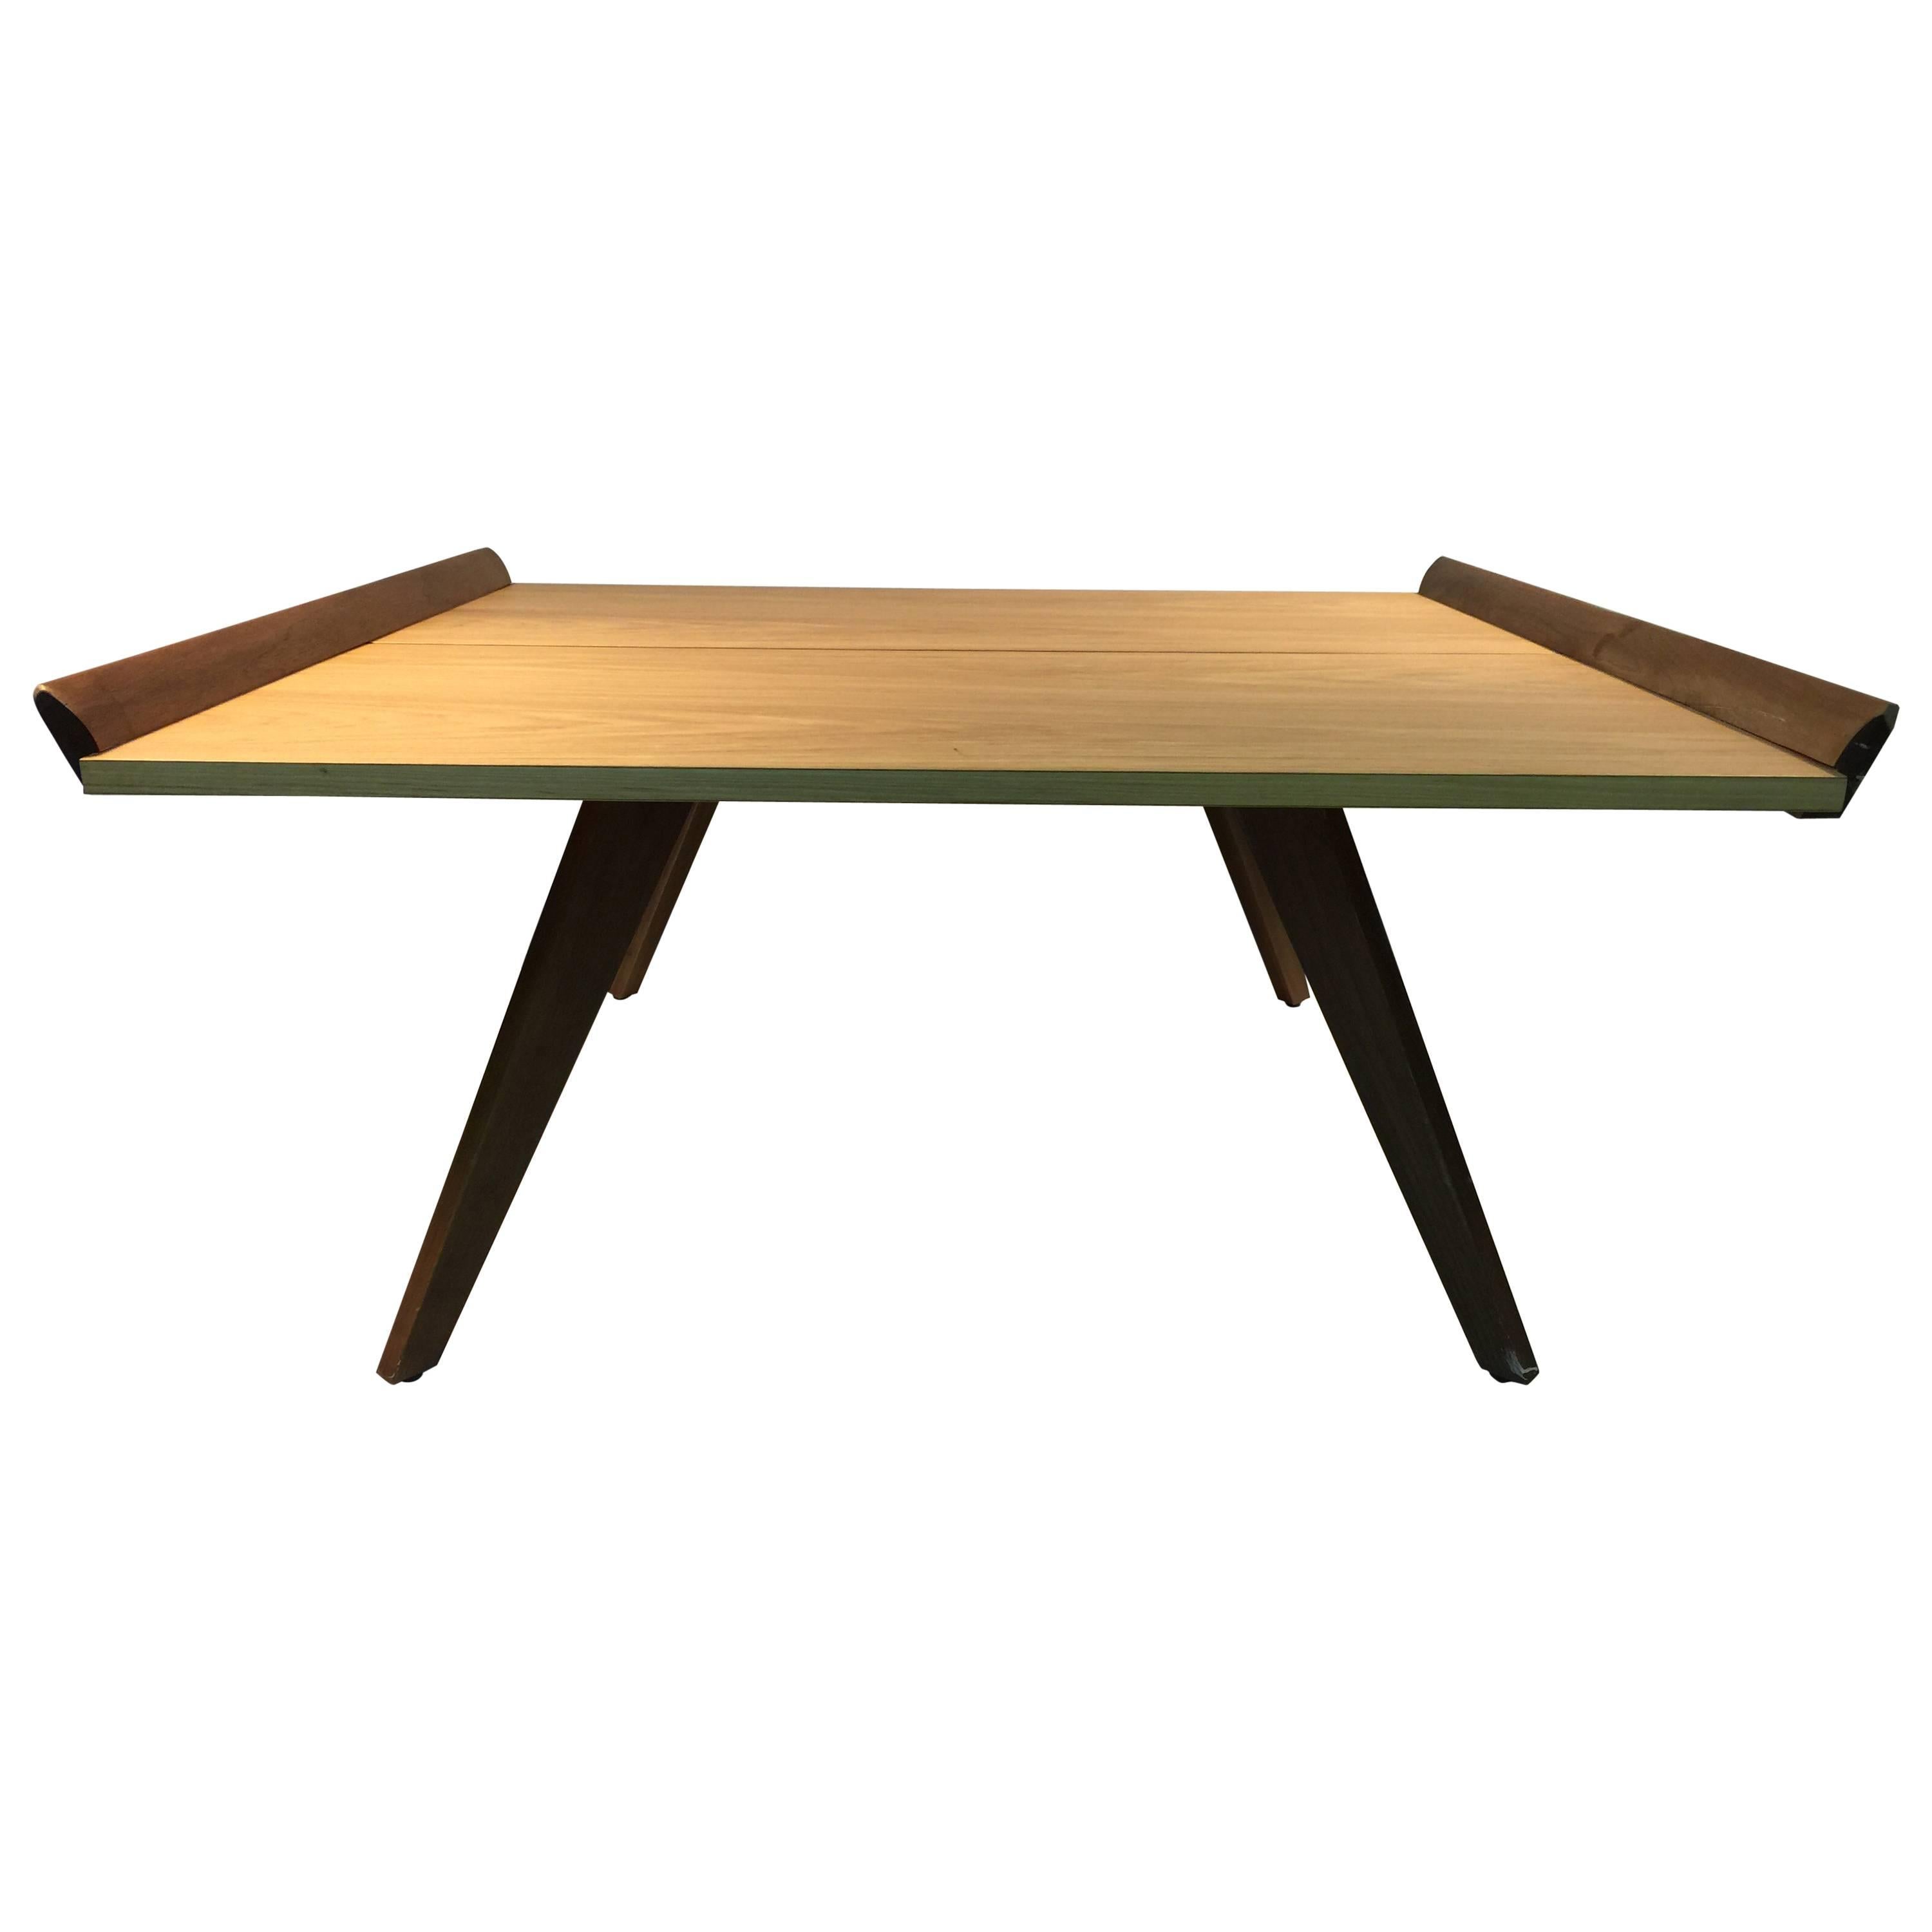 Gorgeous George Nakashima for Knoll Splay-Leg Table For Sale